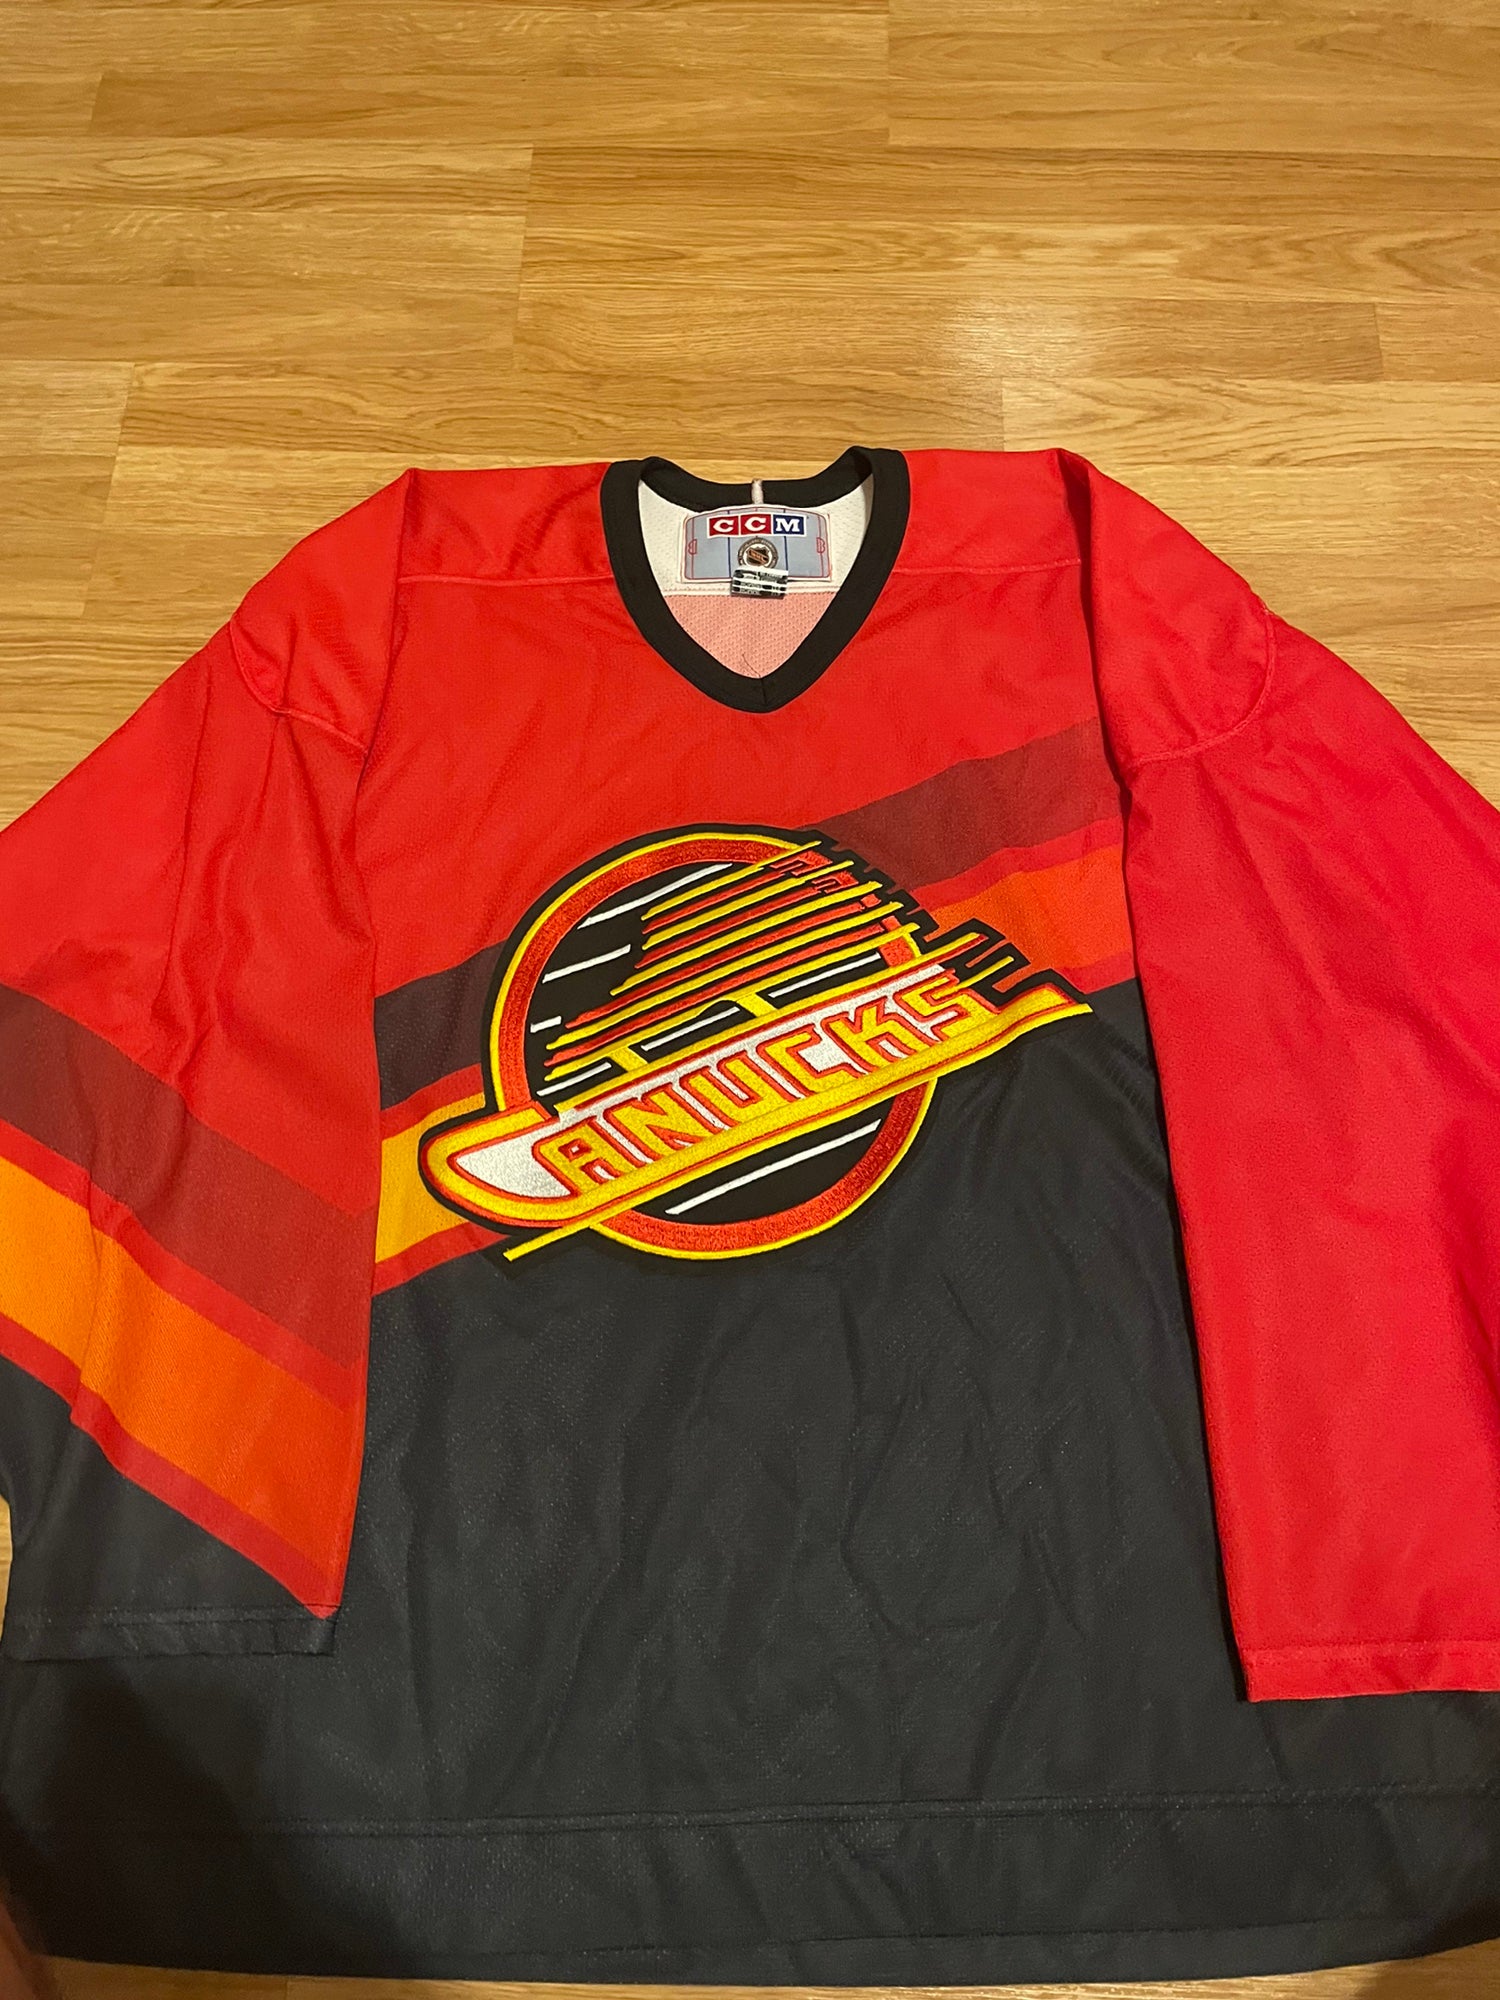 Old school late 70s Vancouver Canucks jersey found at Salvation Army. Lots  of people classify this as the WORST hockey jersey design ever. What do you  think? : r/ThriftStoreHauls